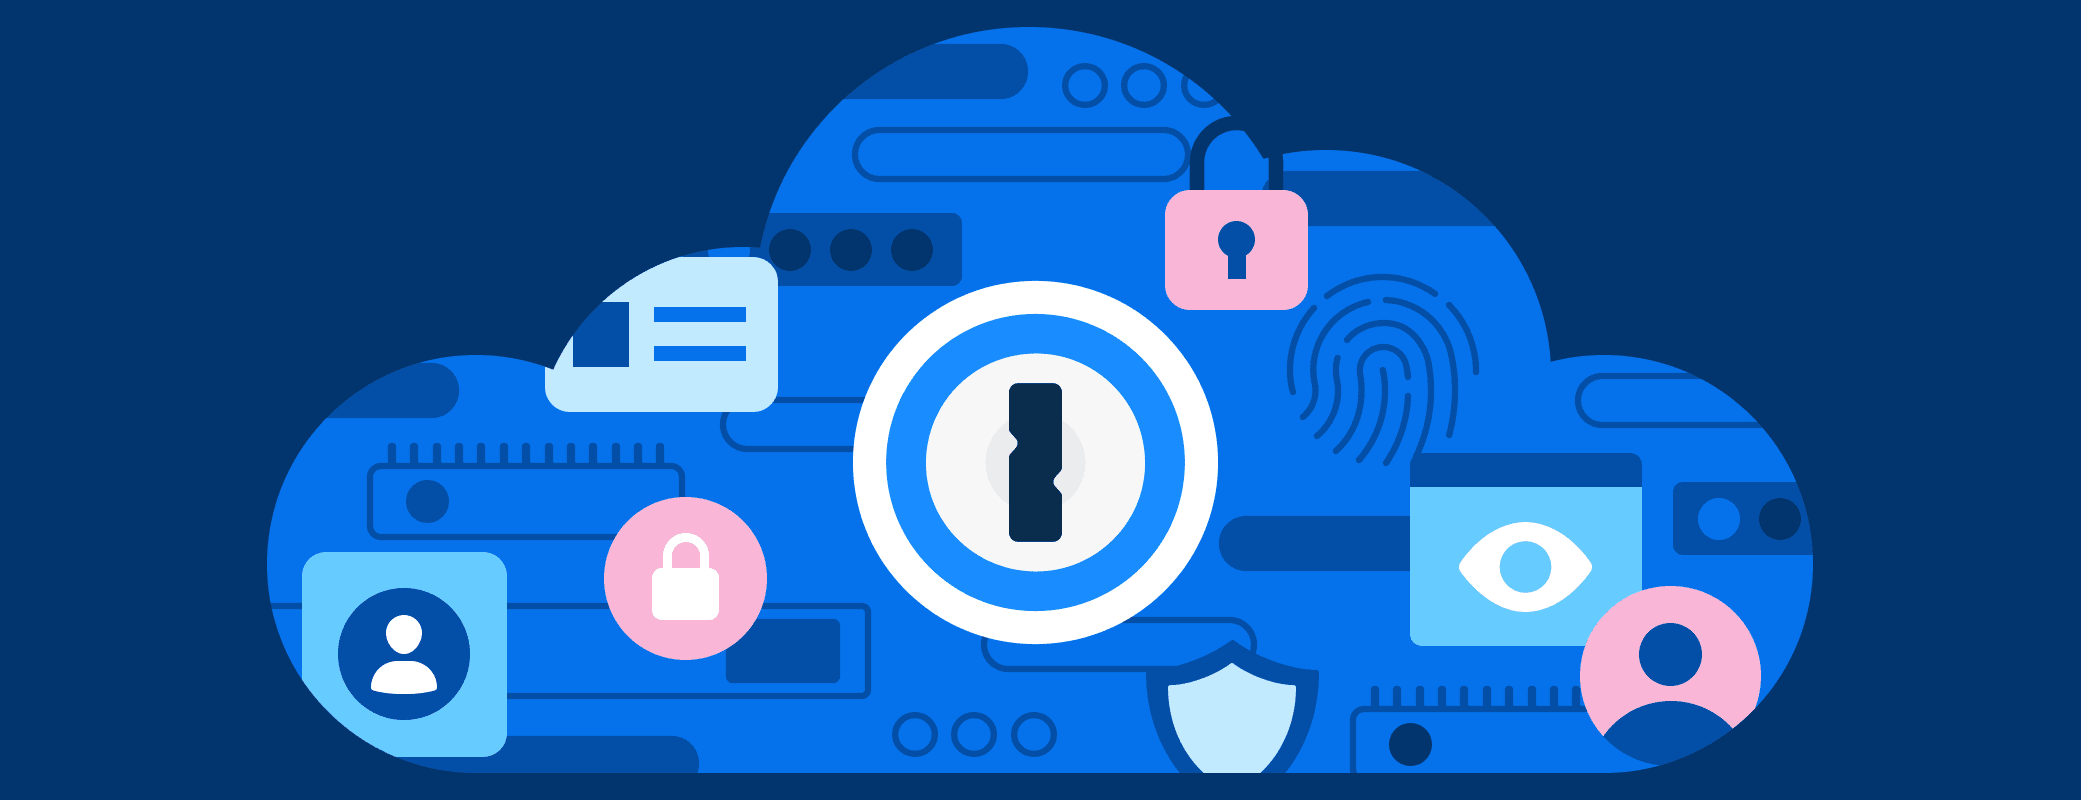 Why you can trust 1Password's cloud-based storage and syncing